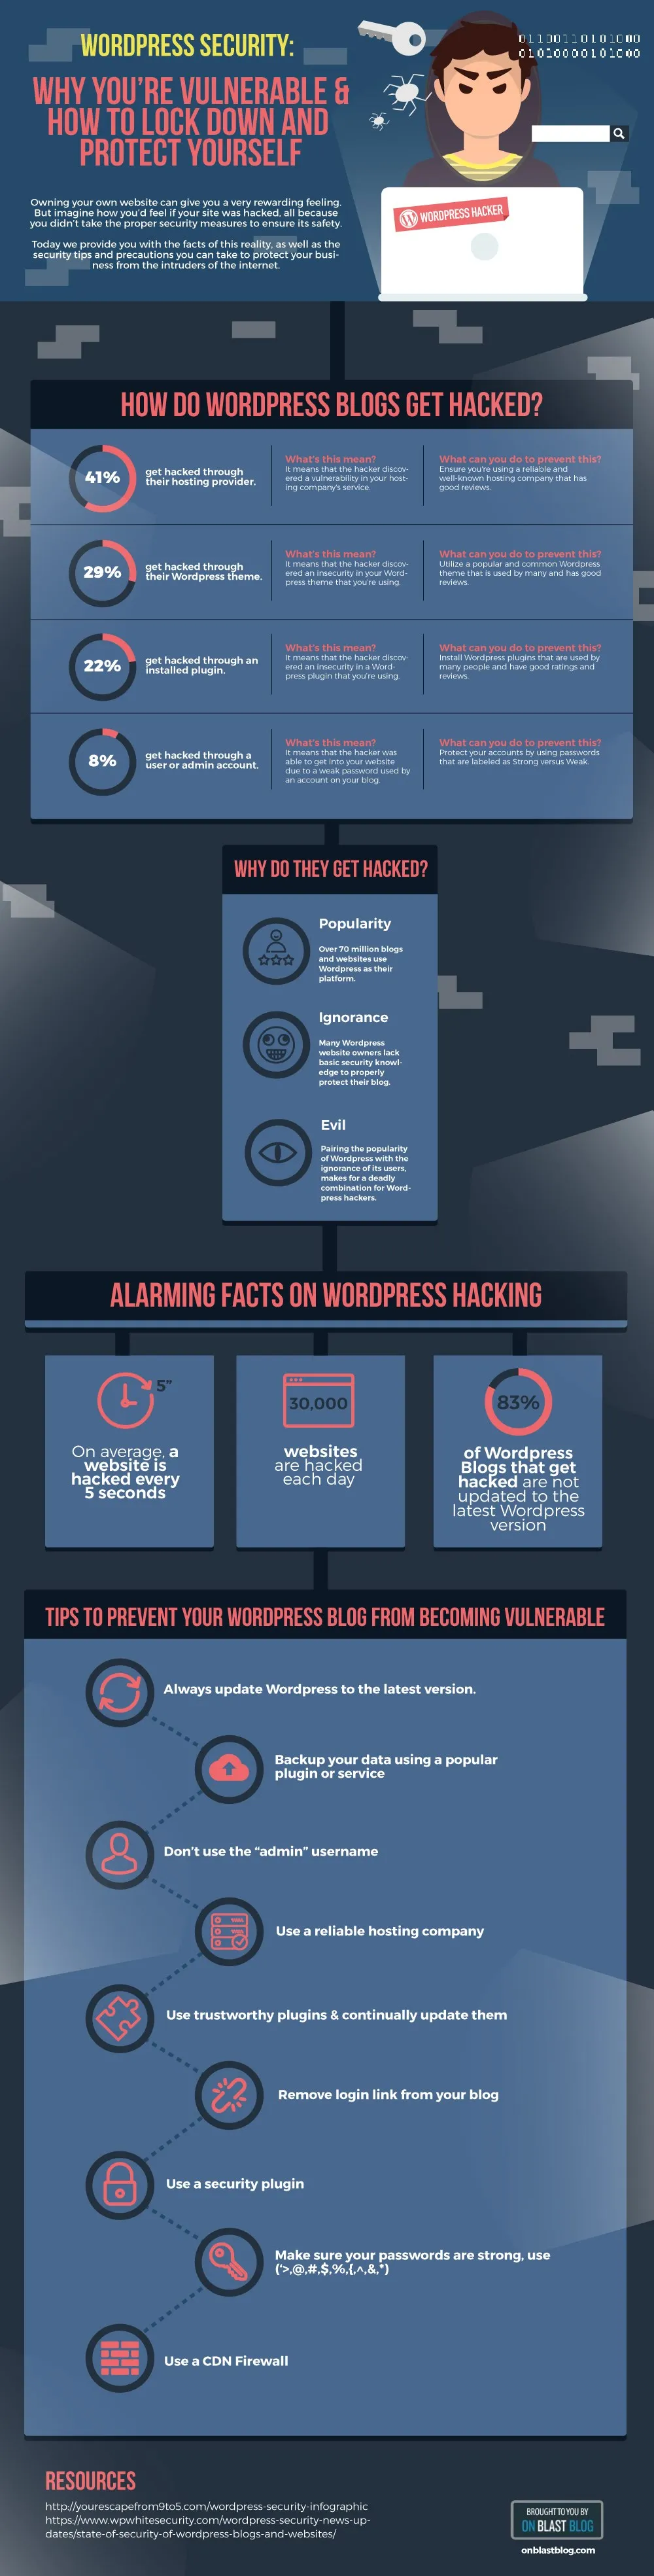 How to Secure Your WordPress Site - #Infographic